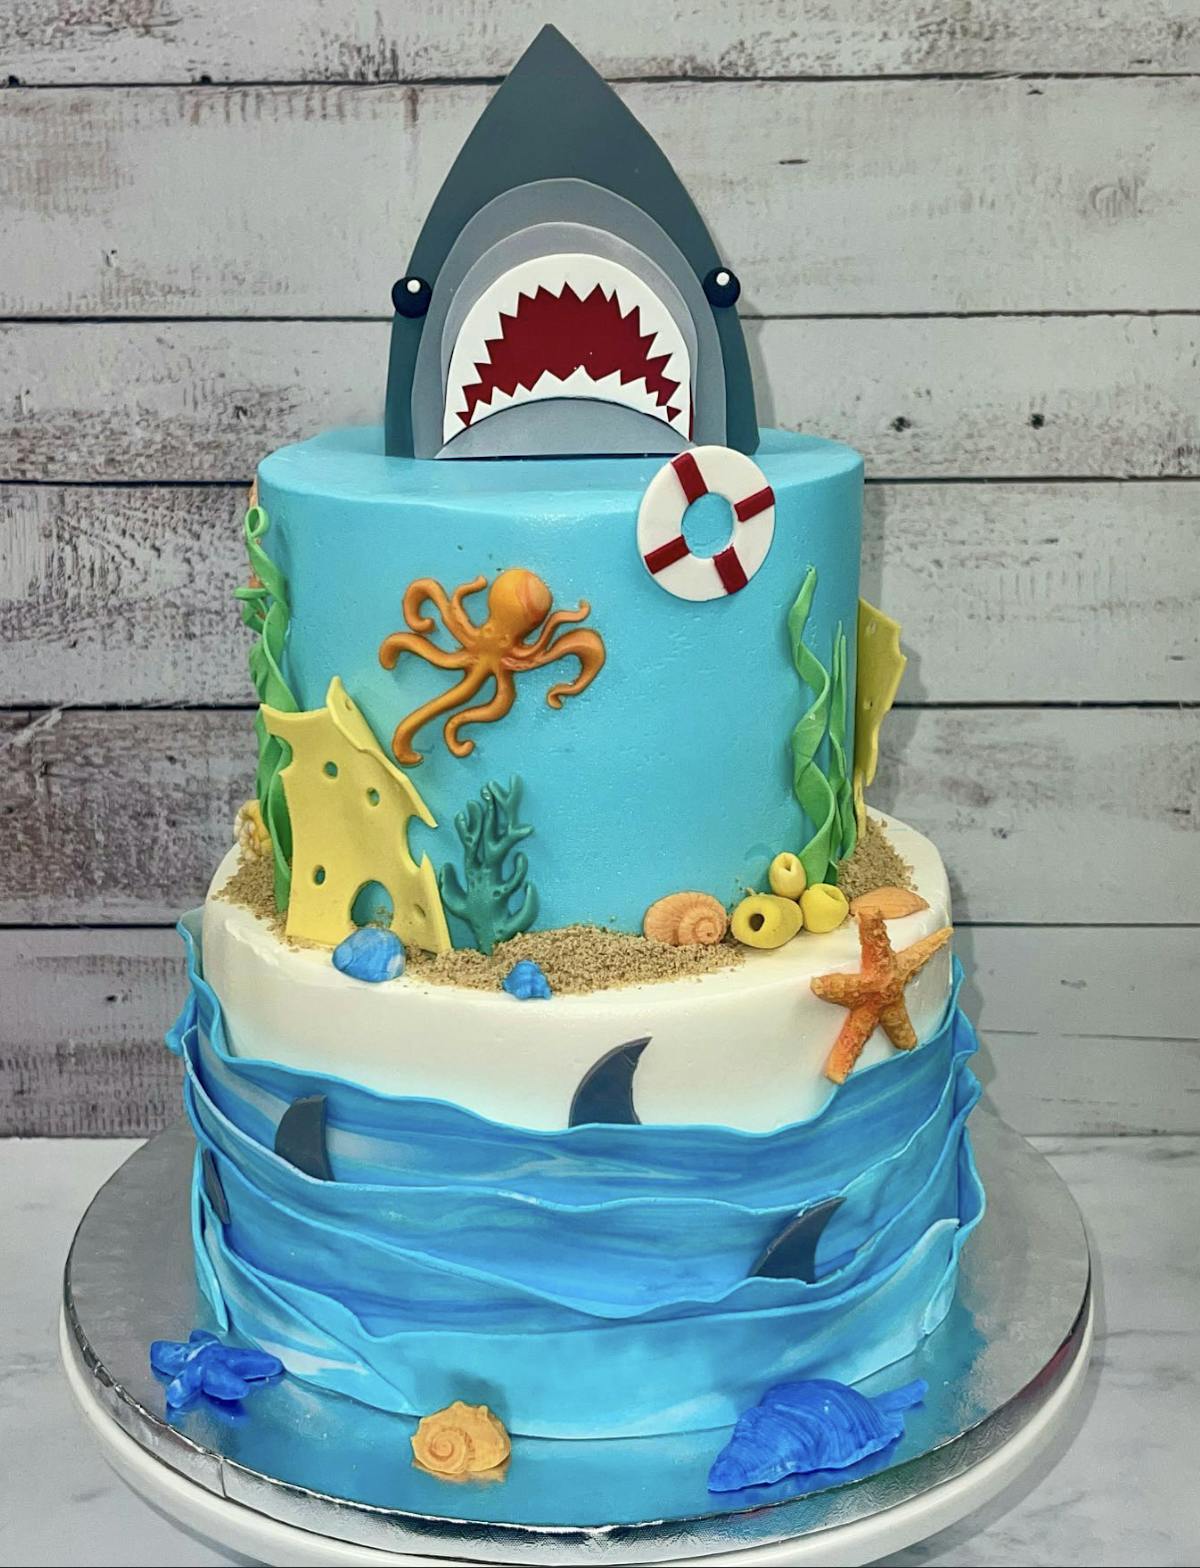 a cake with shark decorations